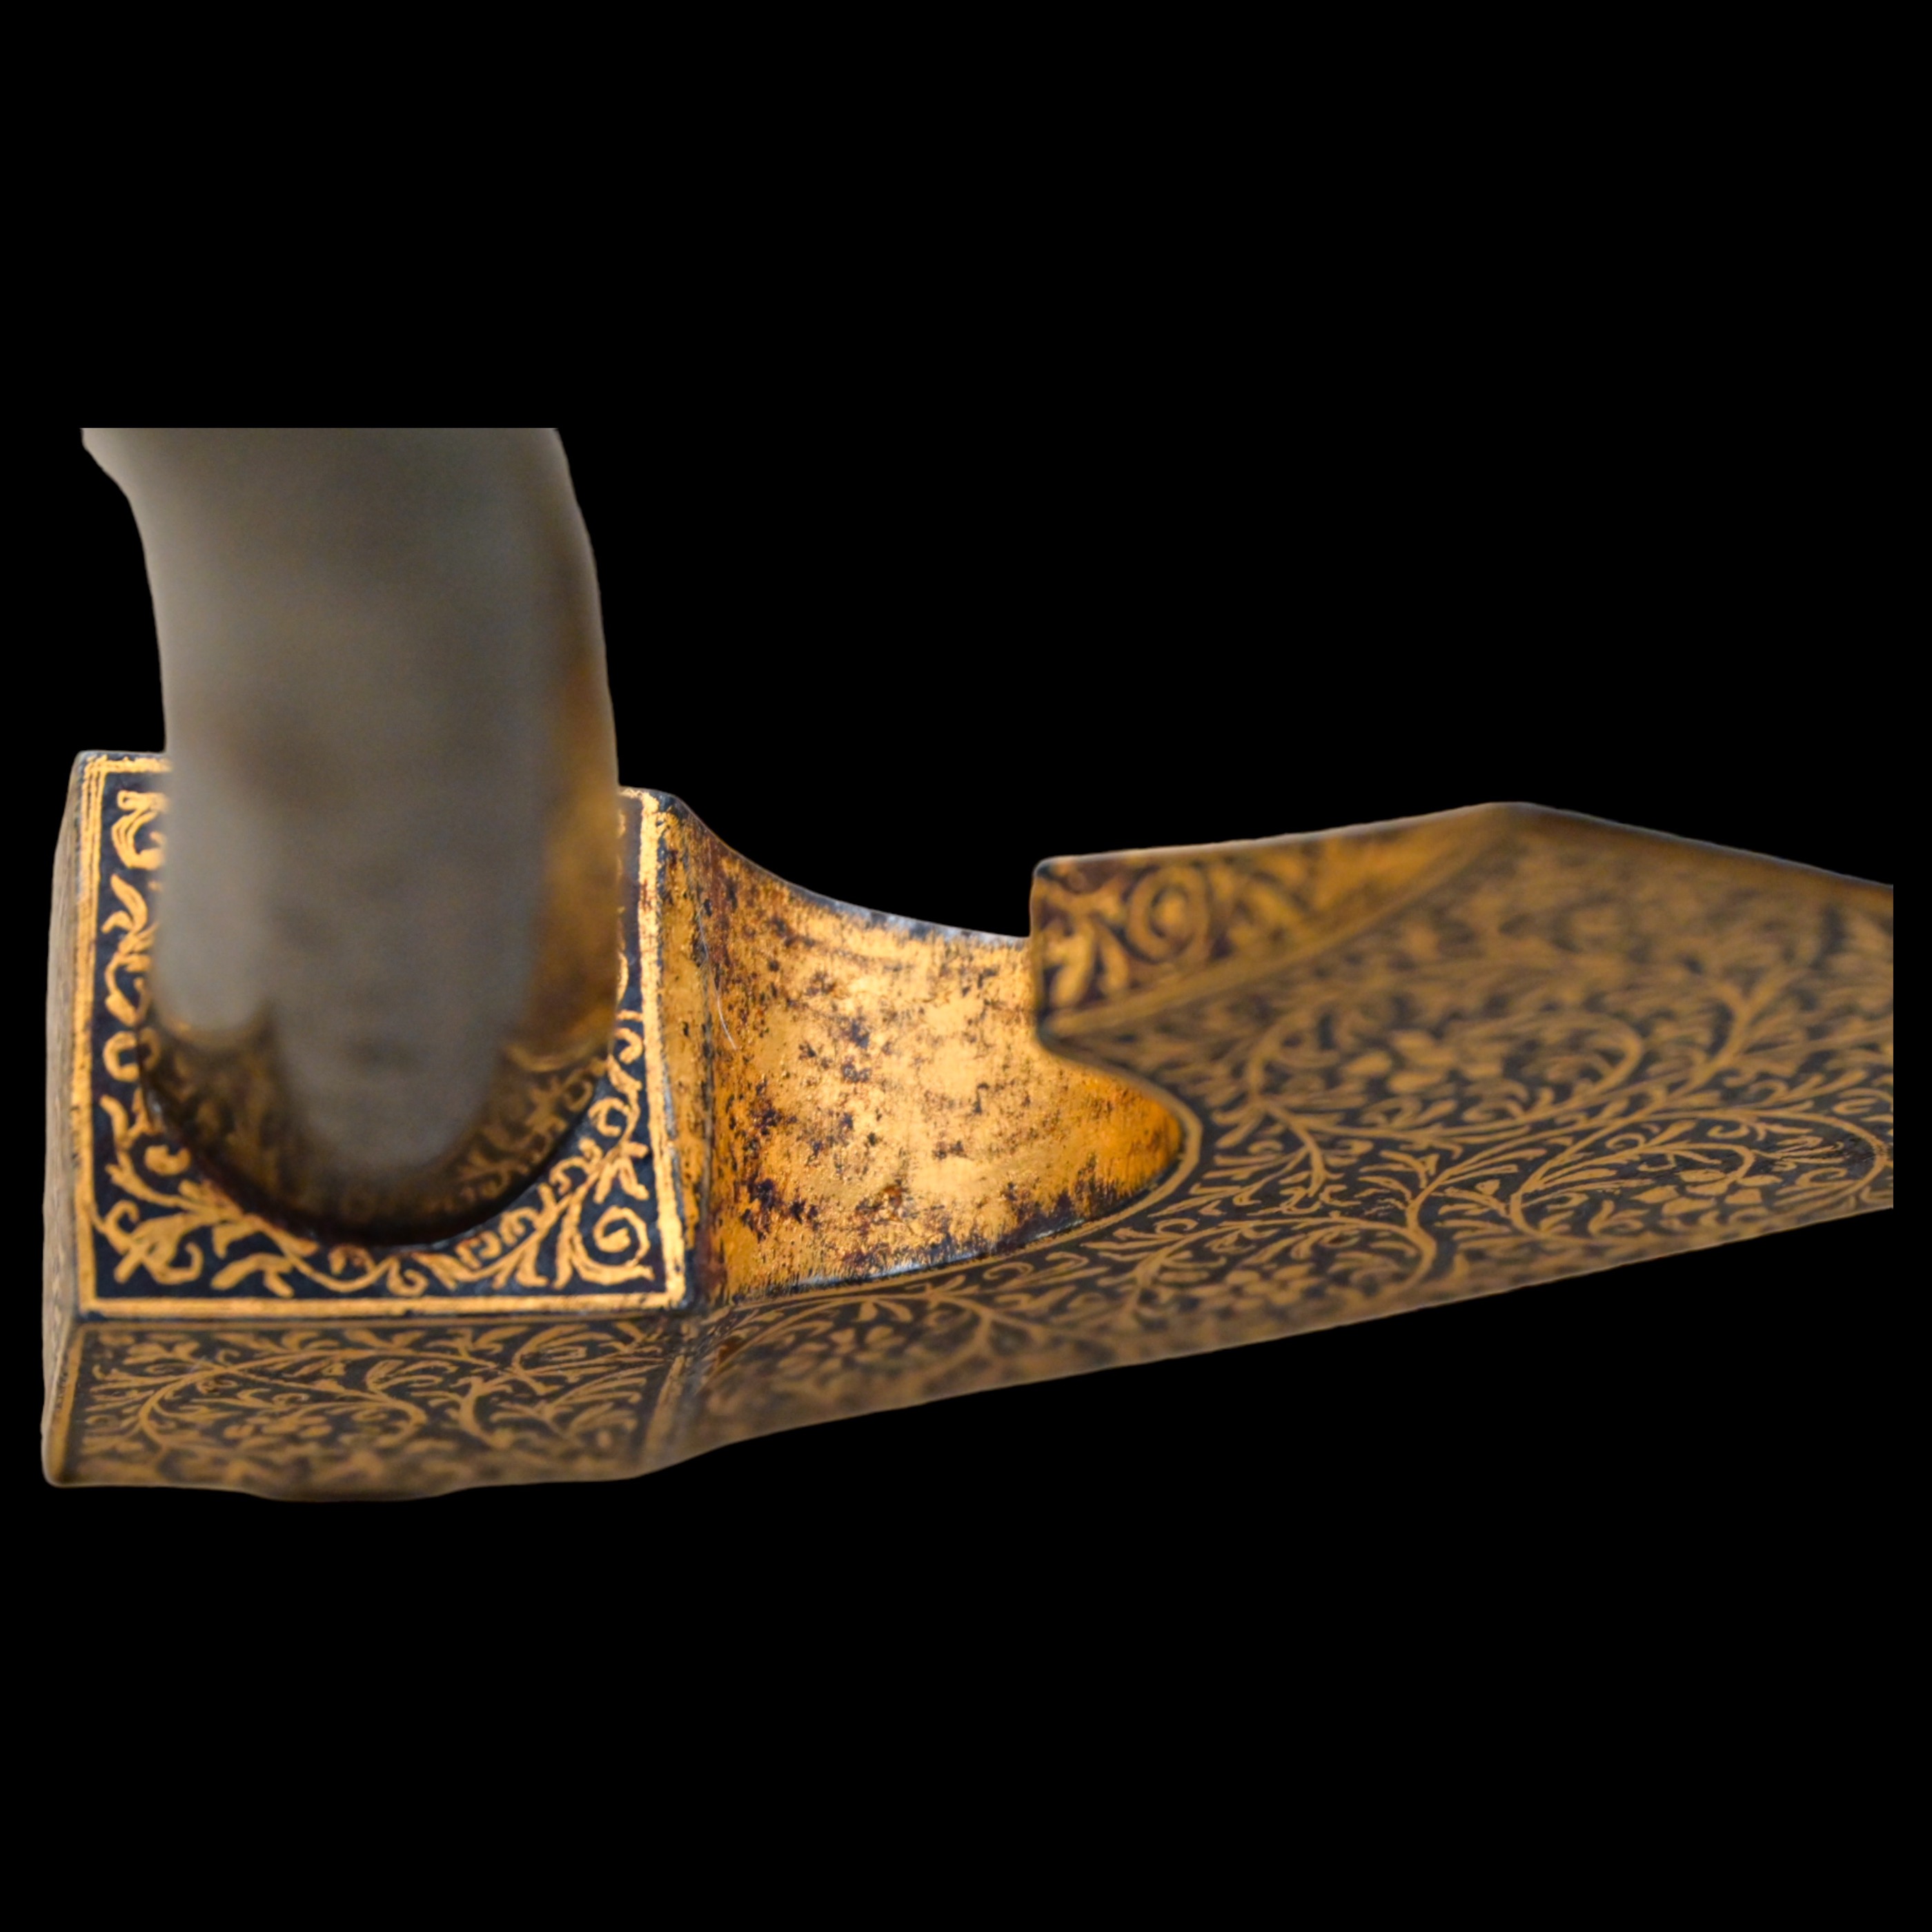 A very rare ceremonial ax decorated with a golden kofgari. Indo-Persian region 18th-19th century. - Image 5 of 6